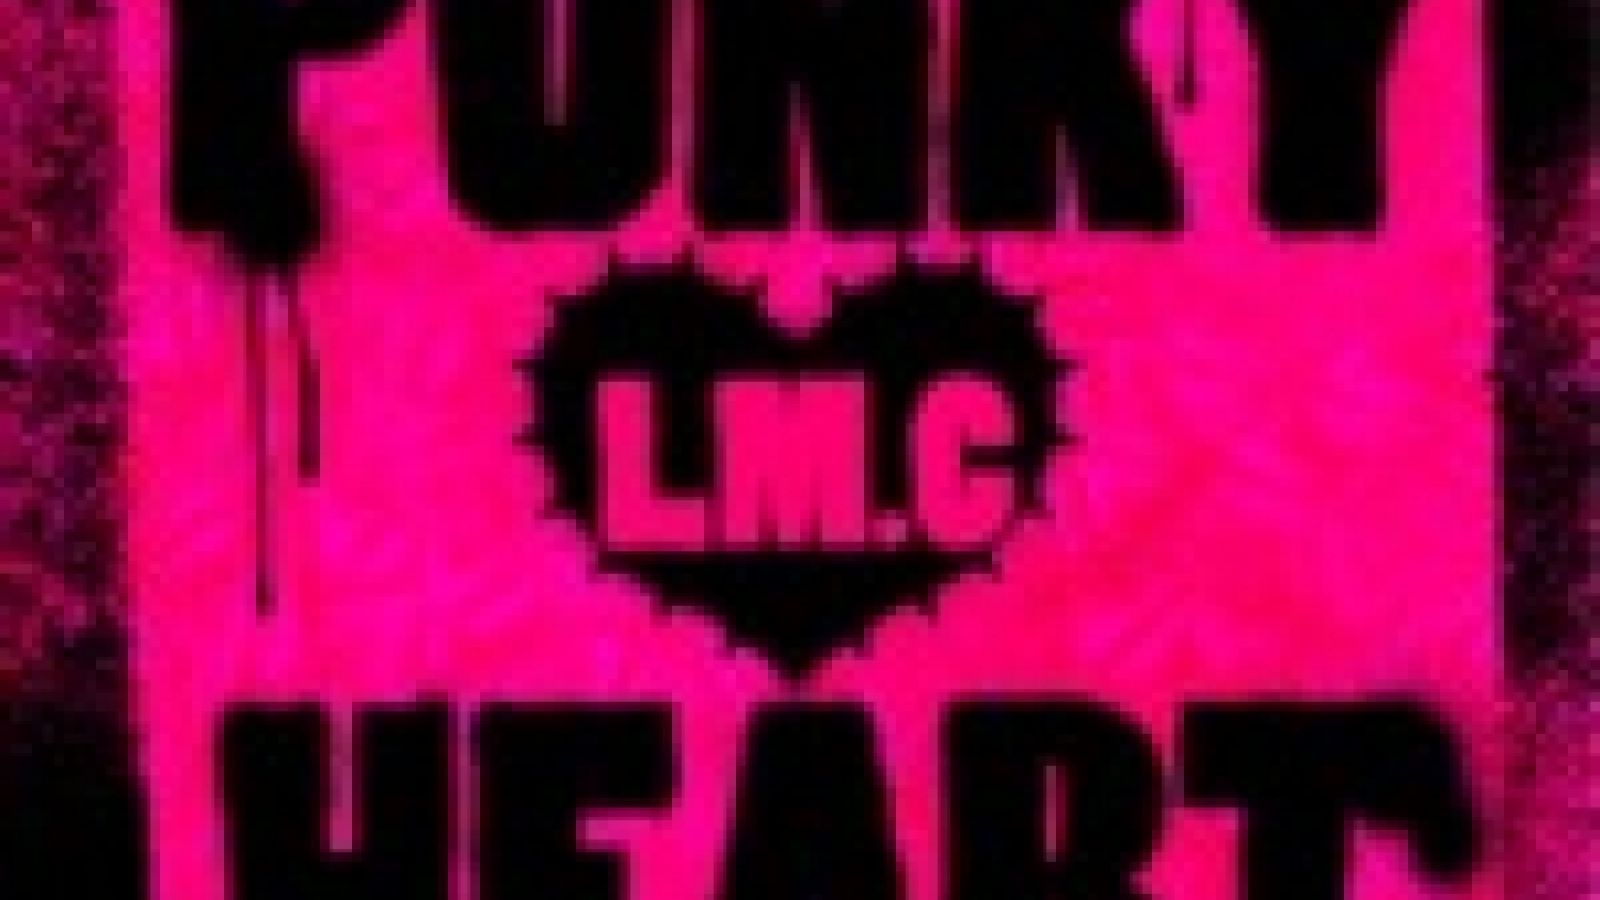 LM.C - PUNKY ❤ HEART © JaME